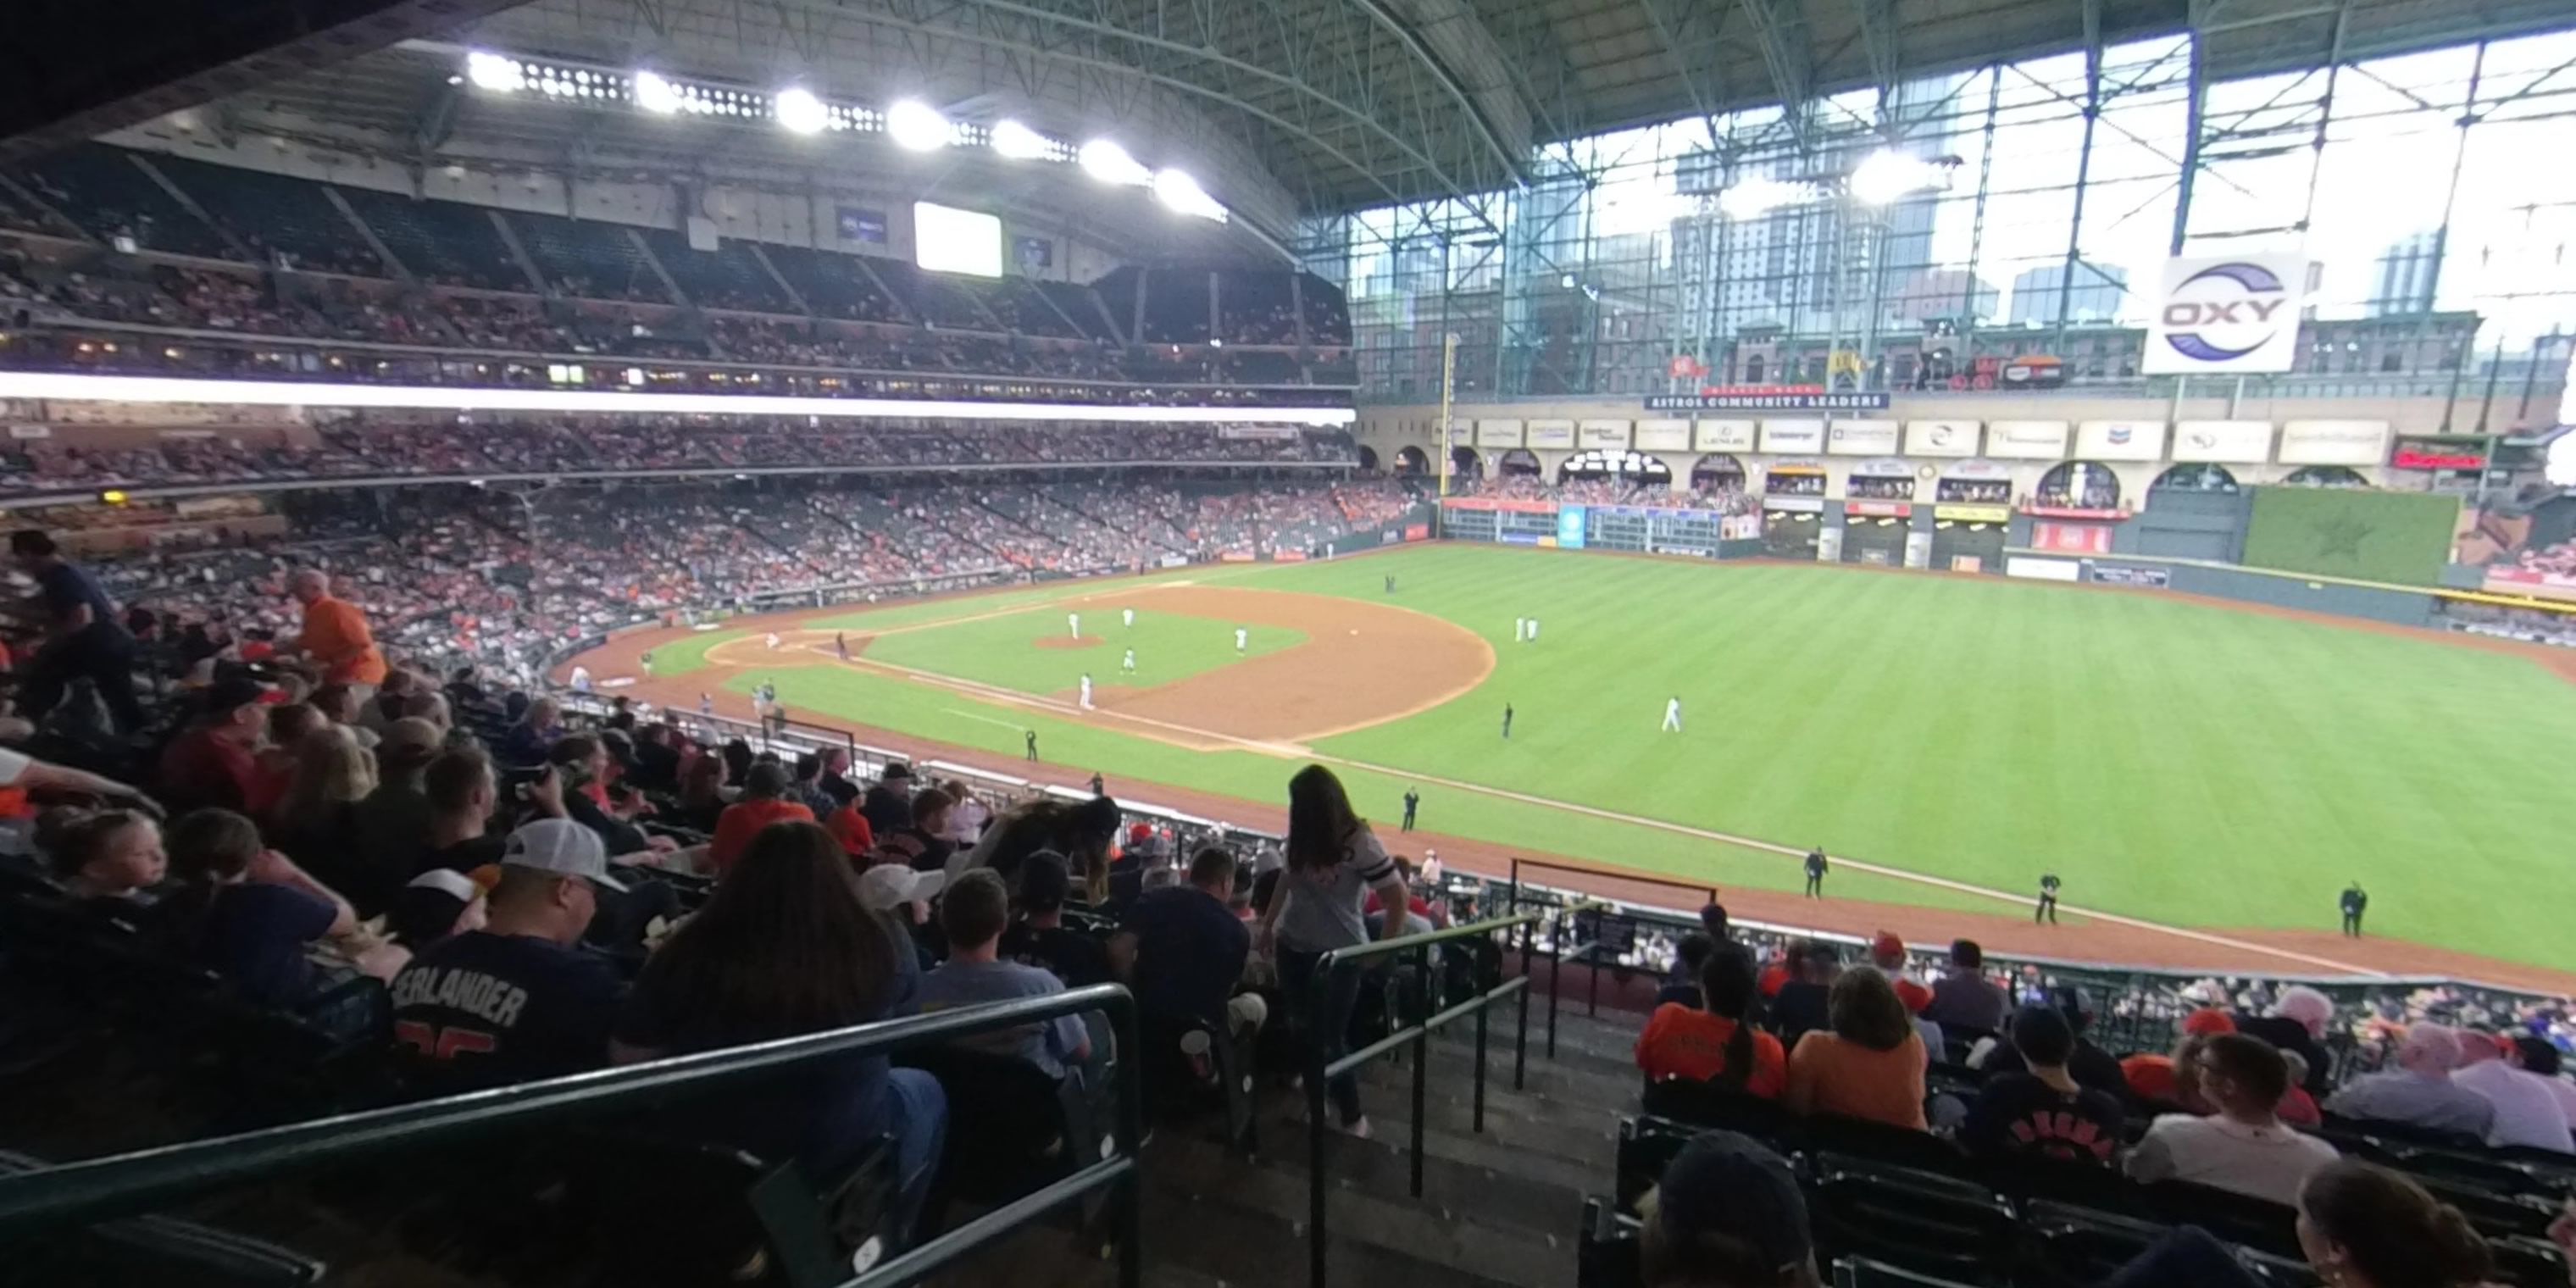 Section 230 at Minute Maid Park 